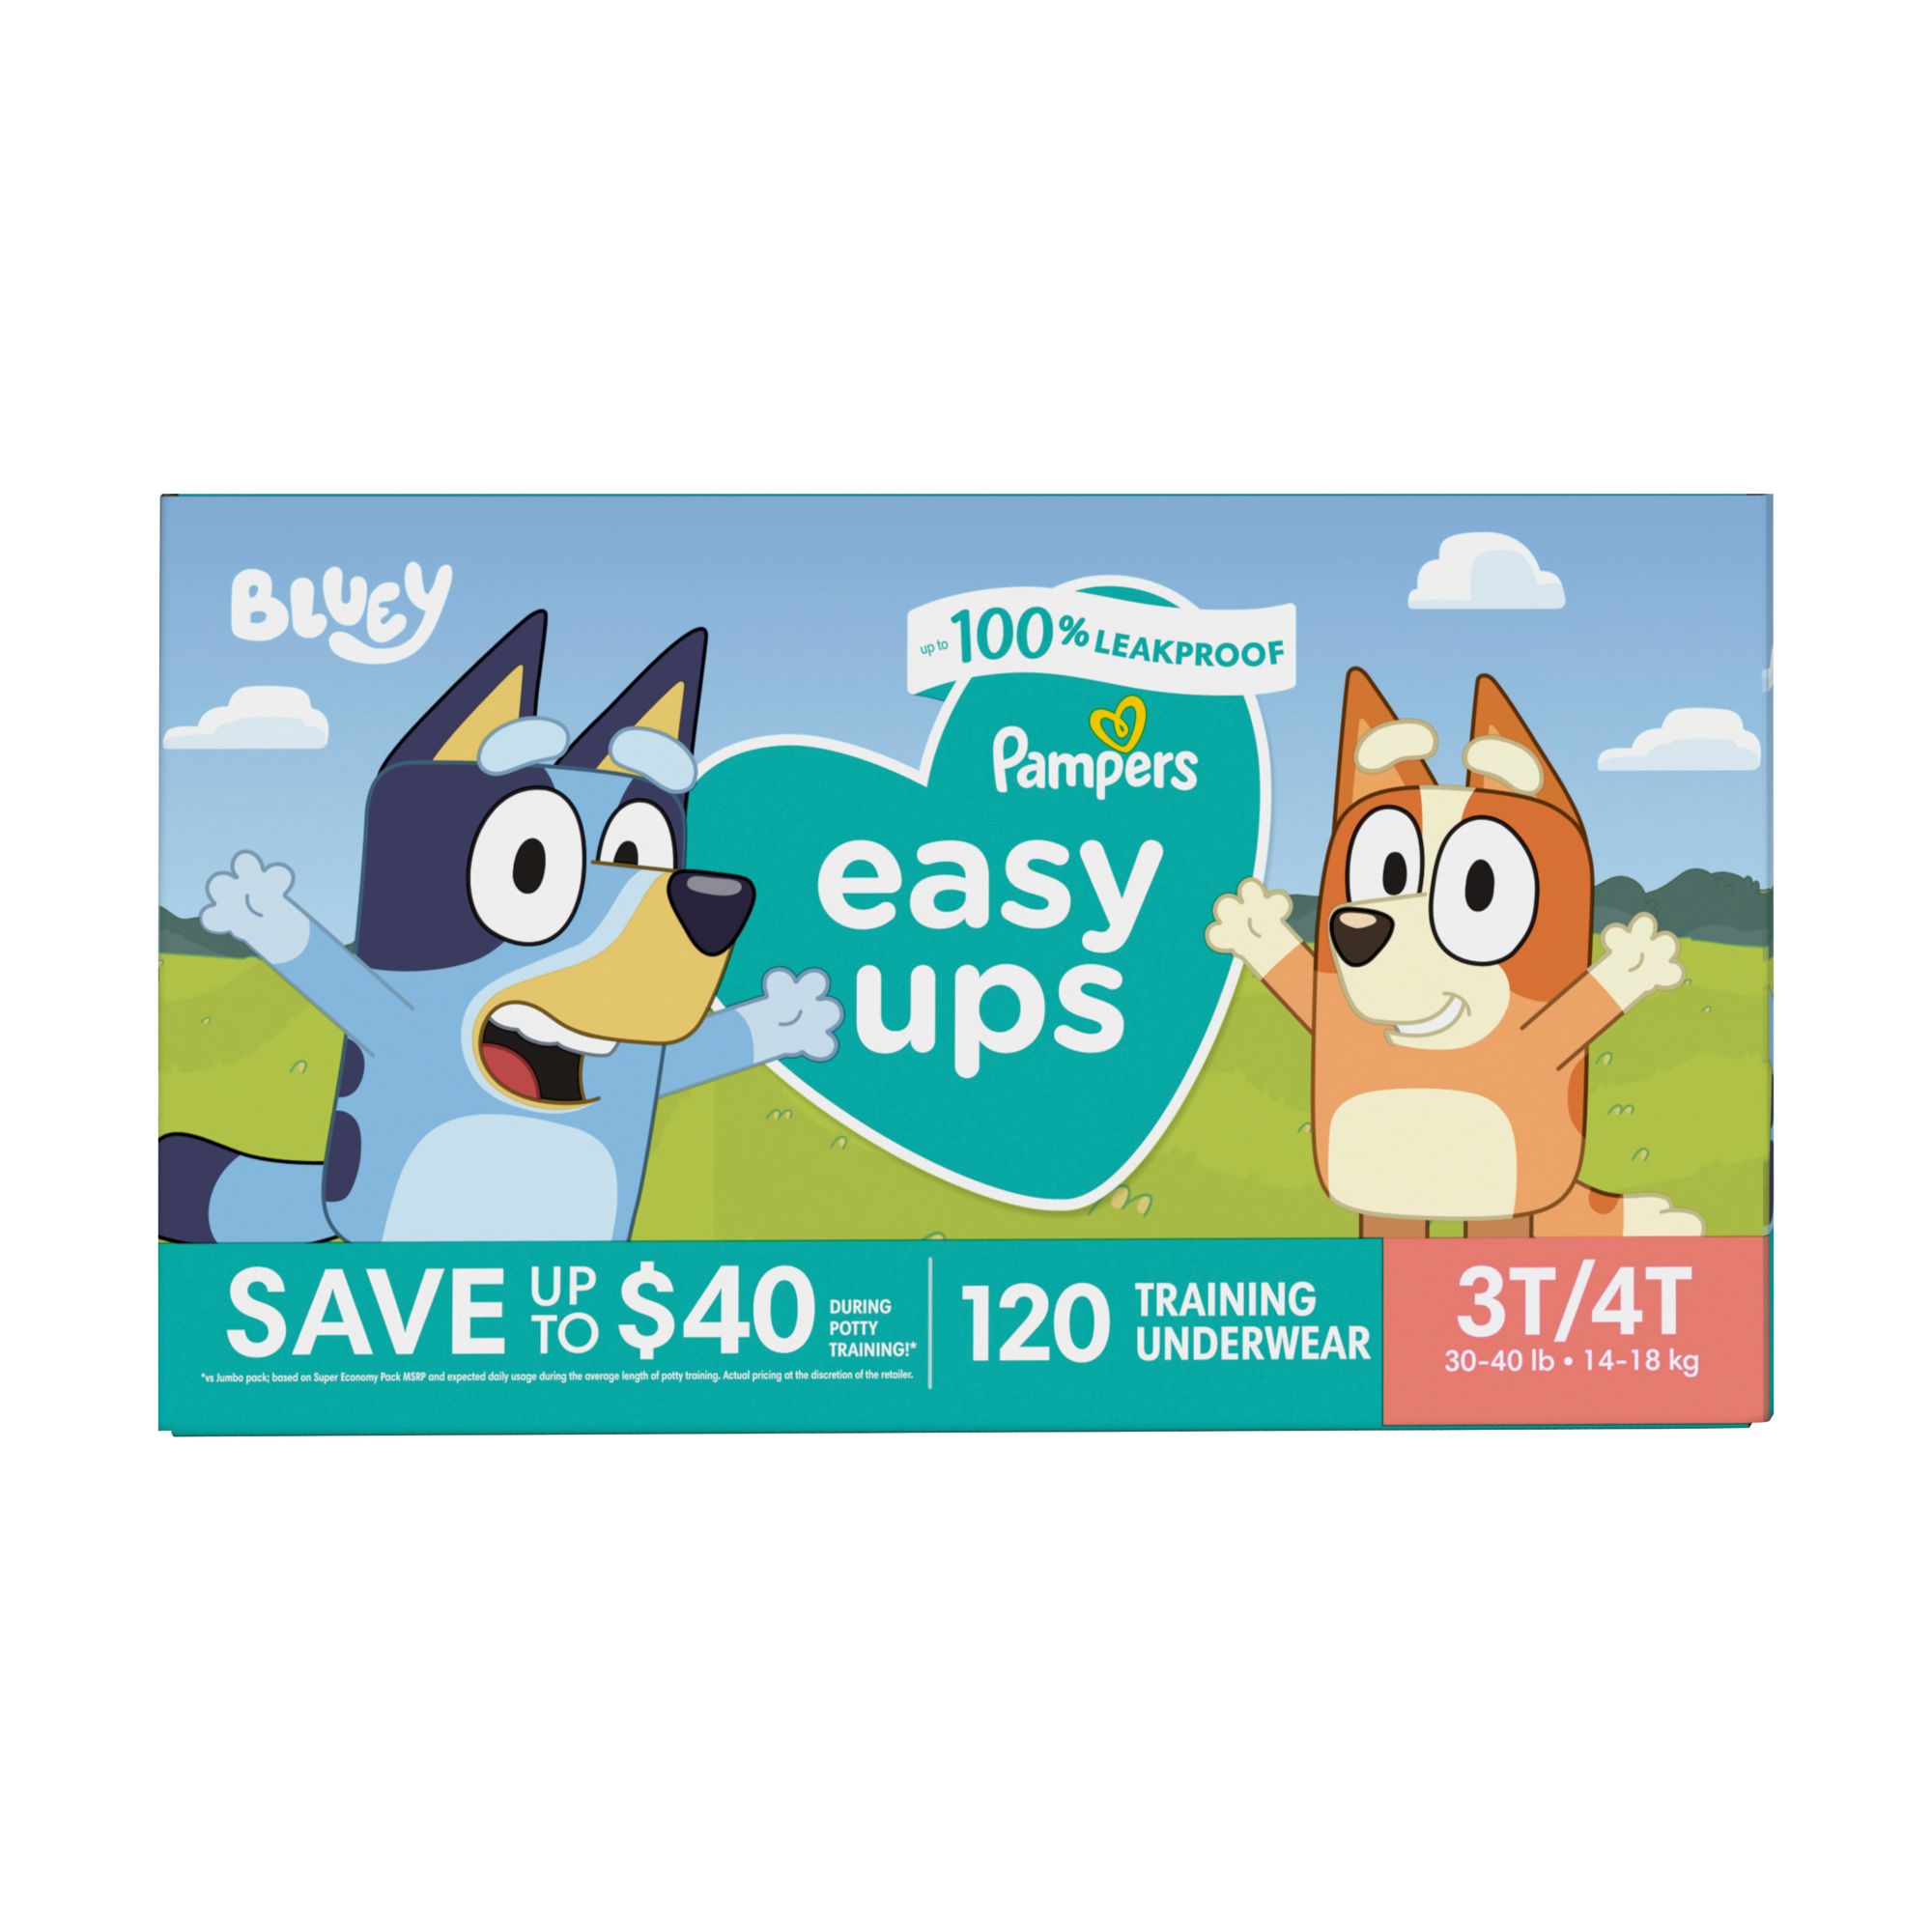 Pampers Easy Ups Bluey Training Pants Toddler Boys Size 3T/4T 76 Count  (Select for More Options)